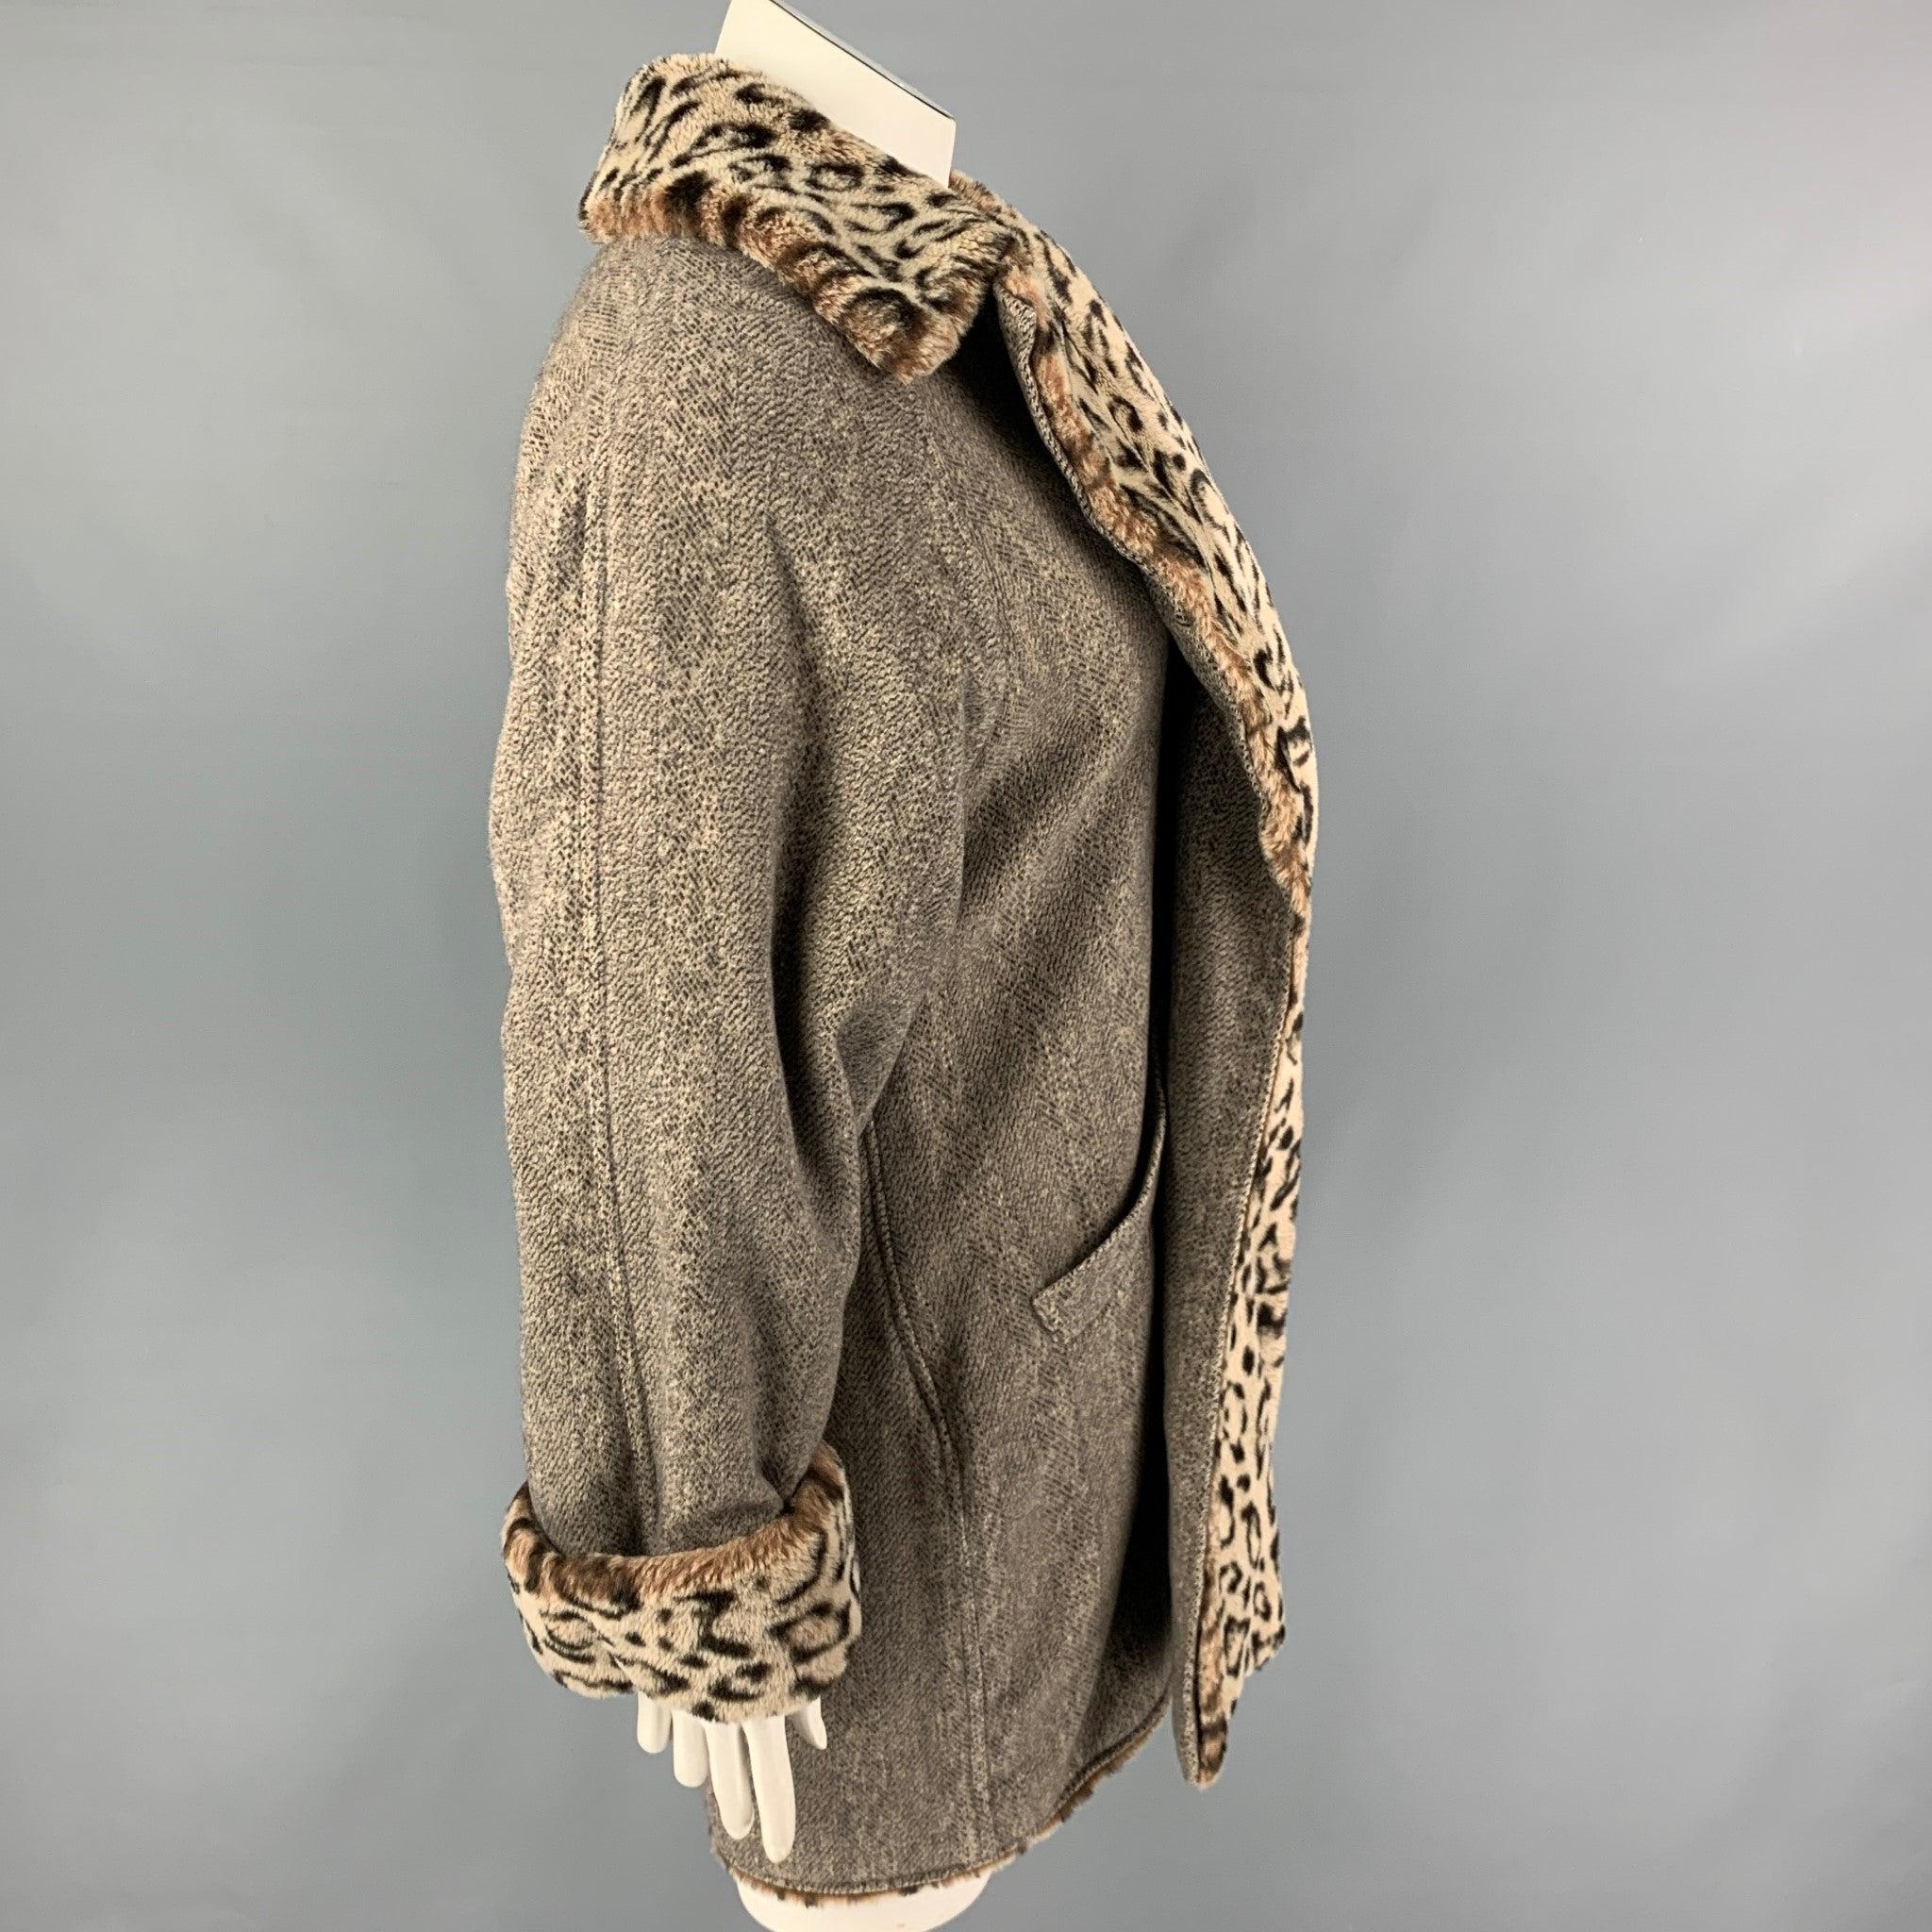 Vintage BILL BLASS coat comes in a grey & brown animal print faux fur featuring a large lapel, front pockets, and a hook & loop closure.
Good
Pre-Owned Condition. Fabric tag removed.  

Marked:   Size tag removed.  

Measurements: 
 
Shoulder: 21